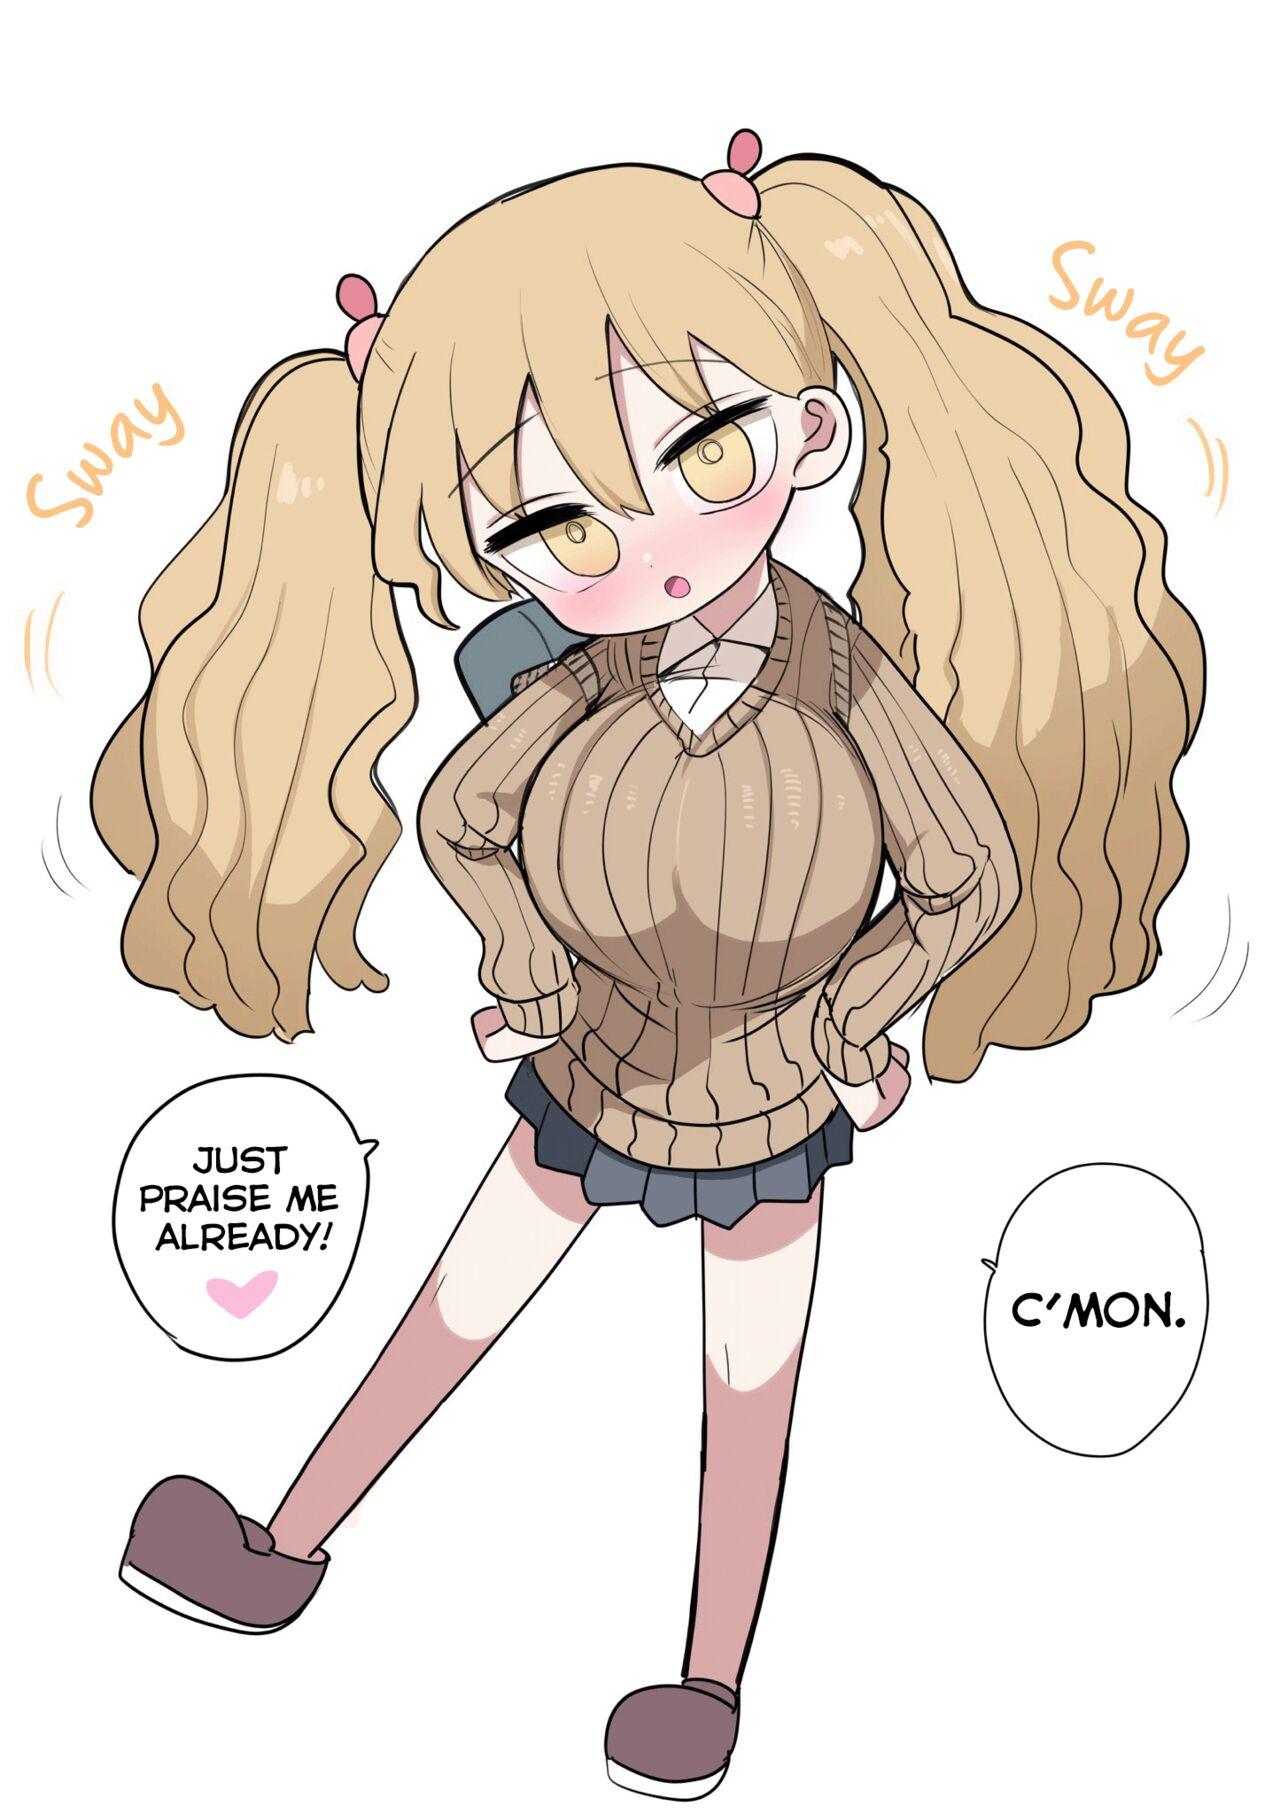 Chiisai Gal | The Small Gal 48